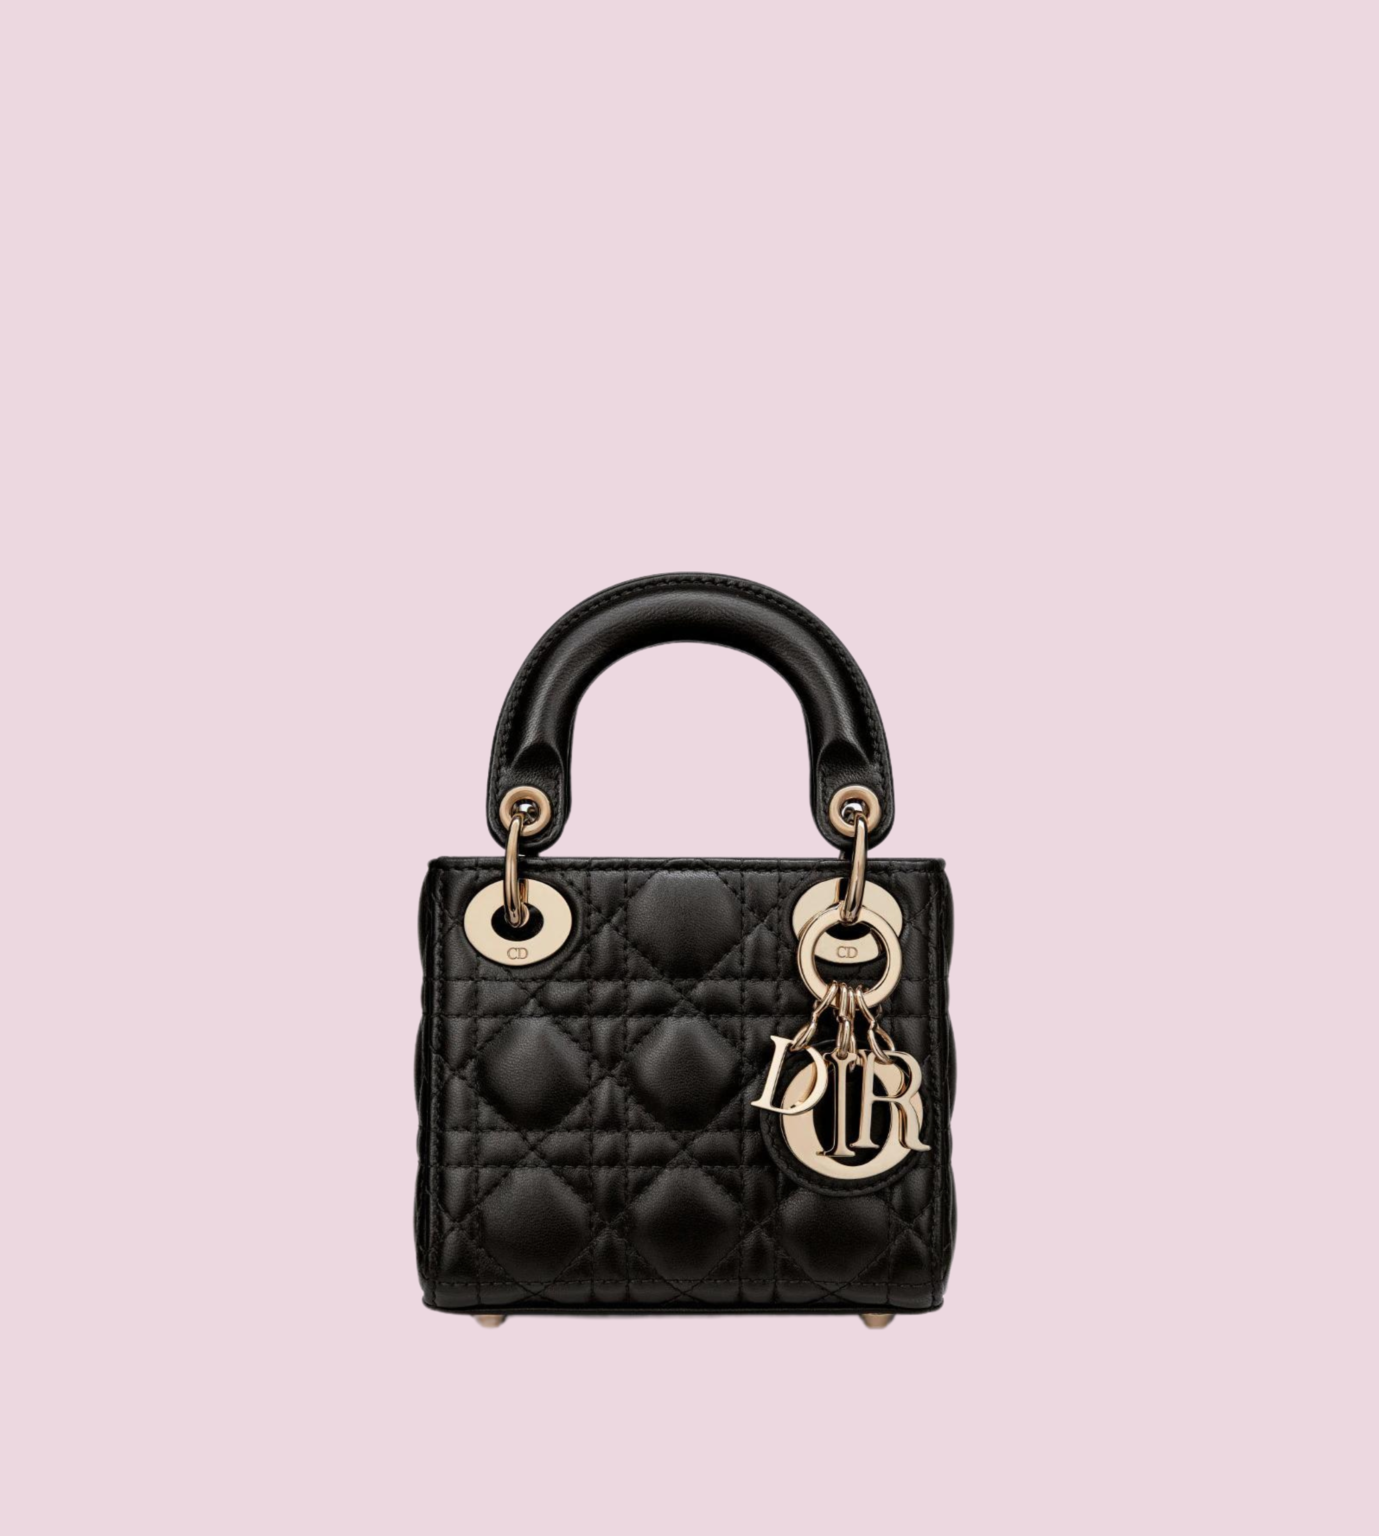 The story behind the iconic Lady Dior Princess Dianas favourite bag